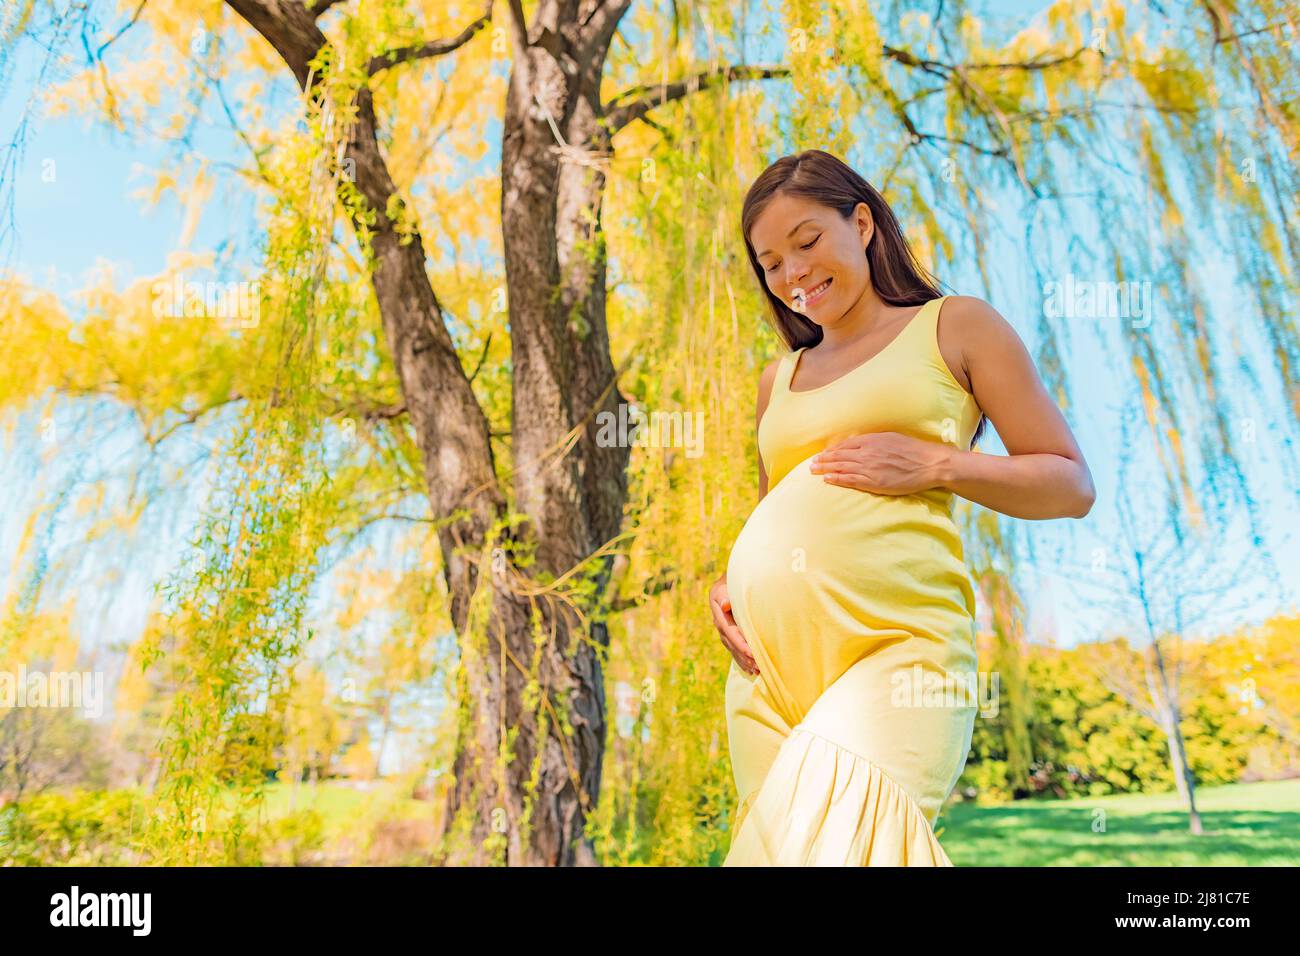 Asian pregnant woman smiling looking down at her baby bump for maternity pregnancy photoshoot in yellow spring park nature outdoors. Healthy happy Stock Photo